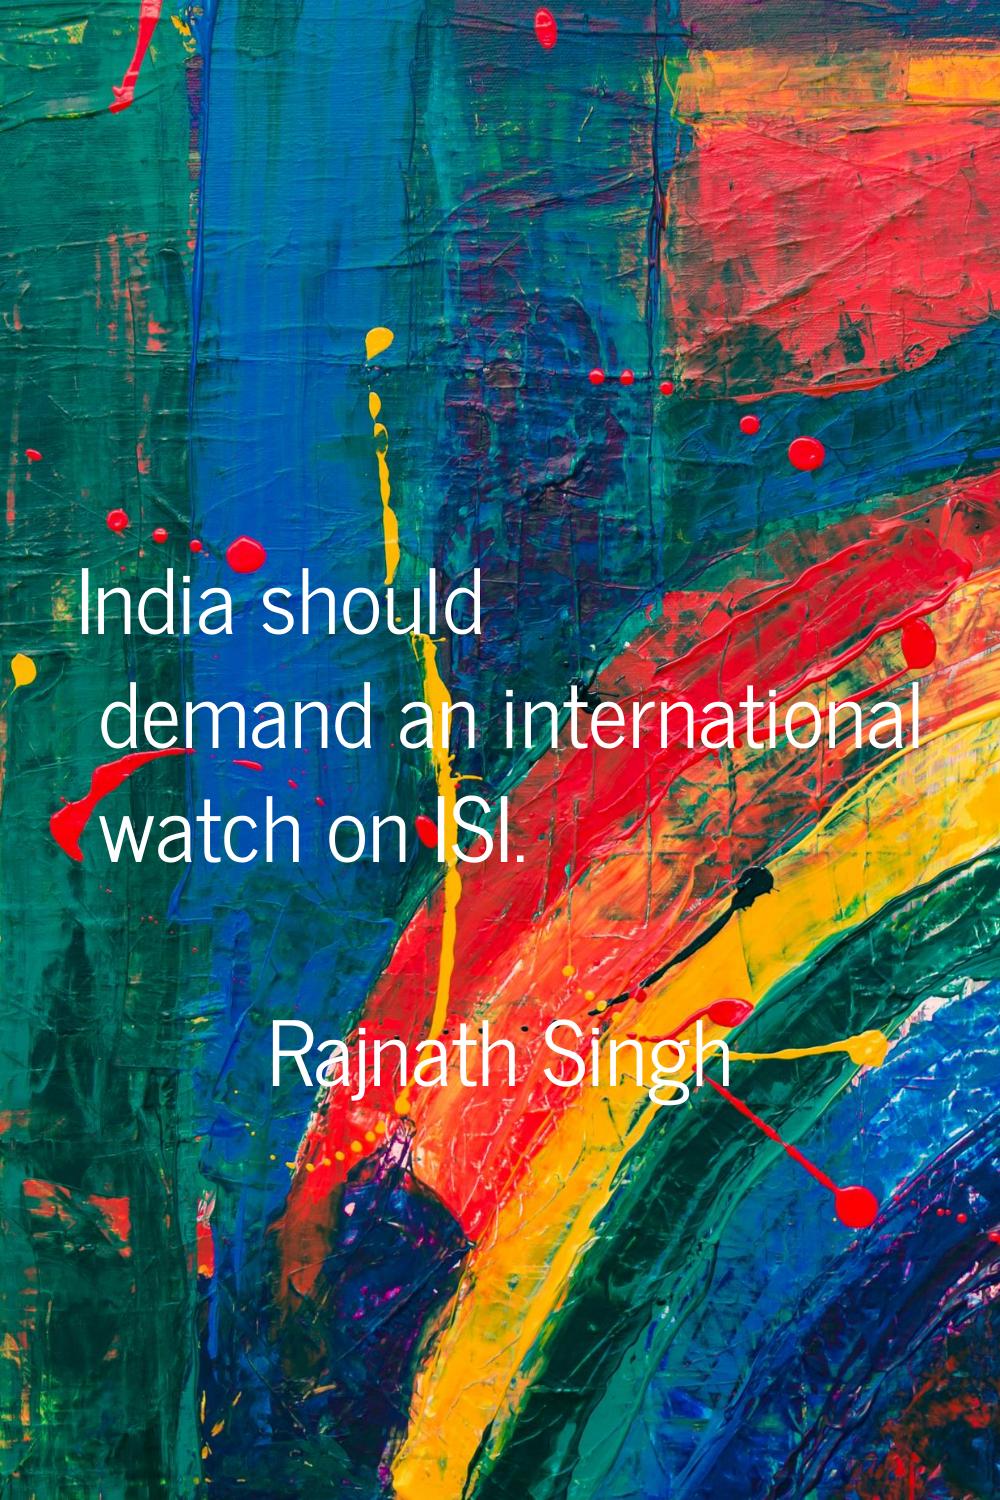 India should demand an international watch on ISI.